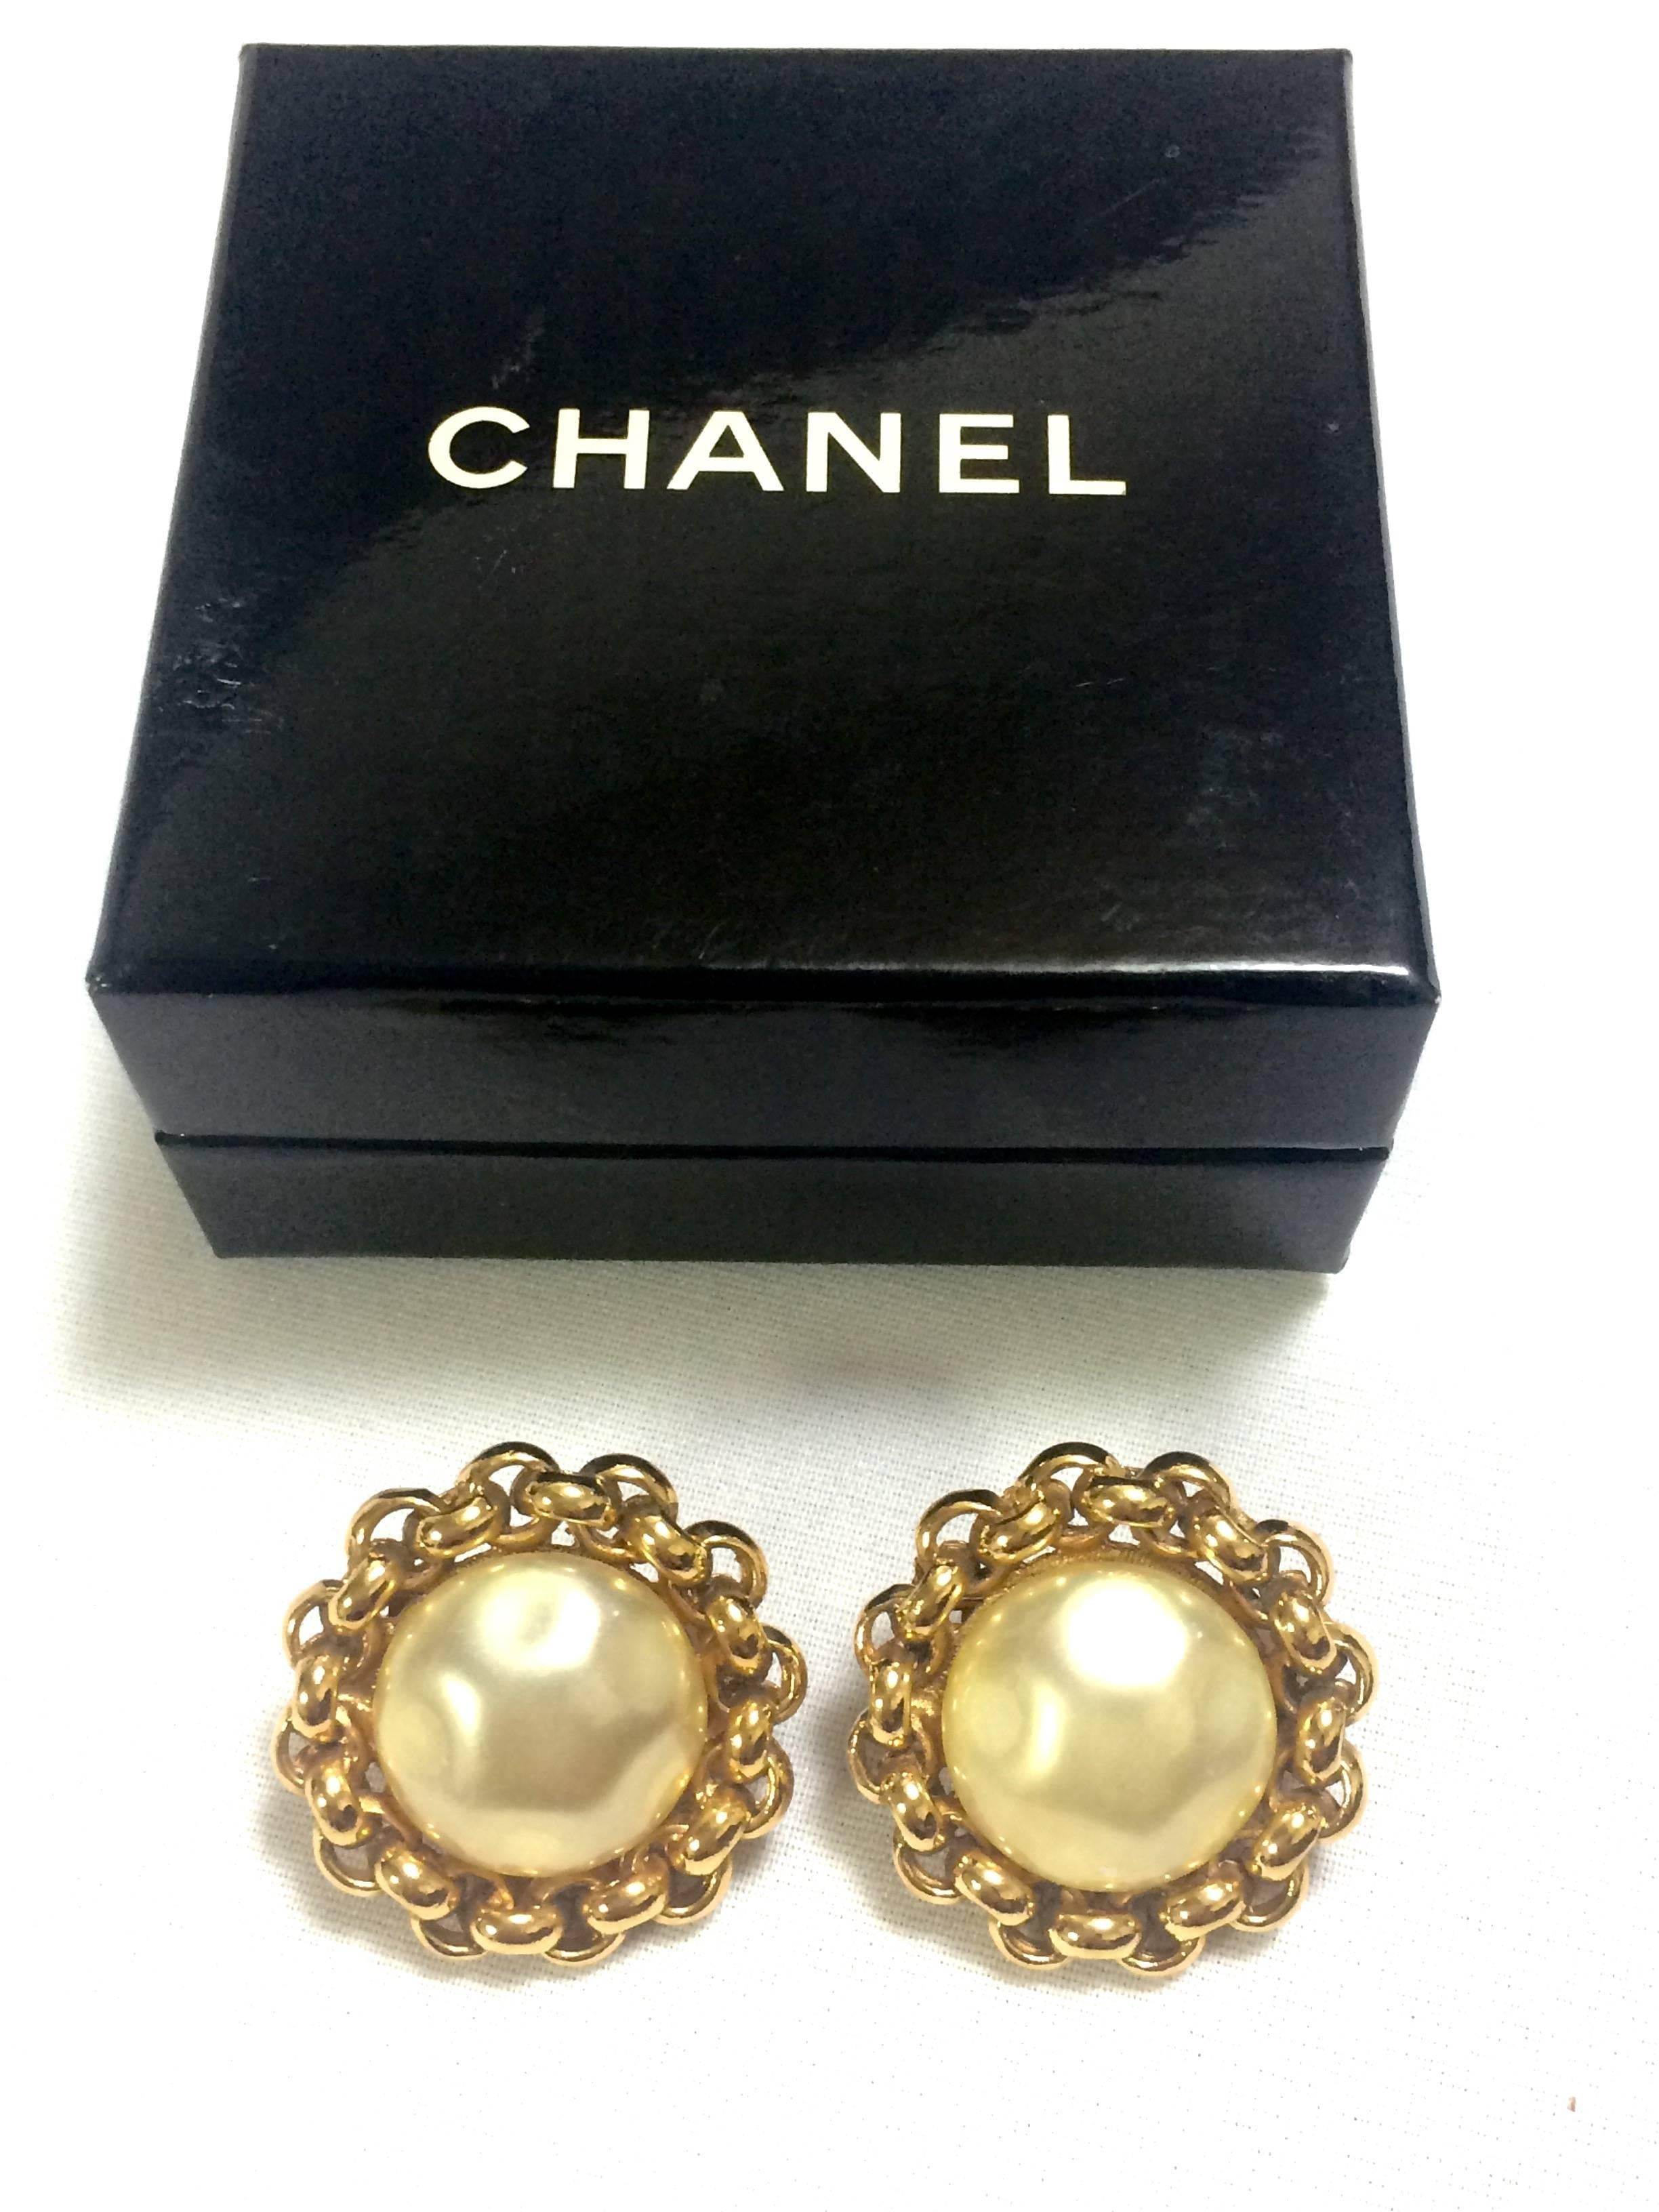 Vintage CHANEL classic simple earrings with large faux pearl and chain frames 2